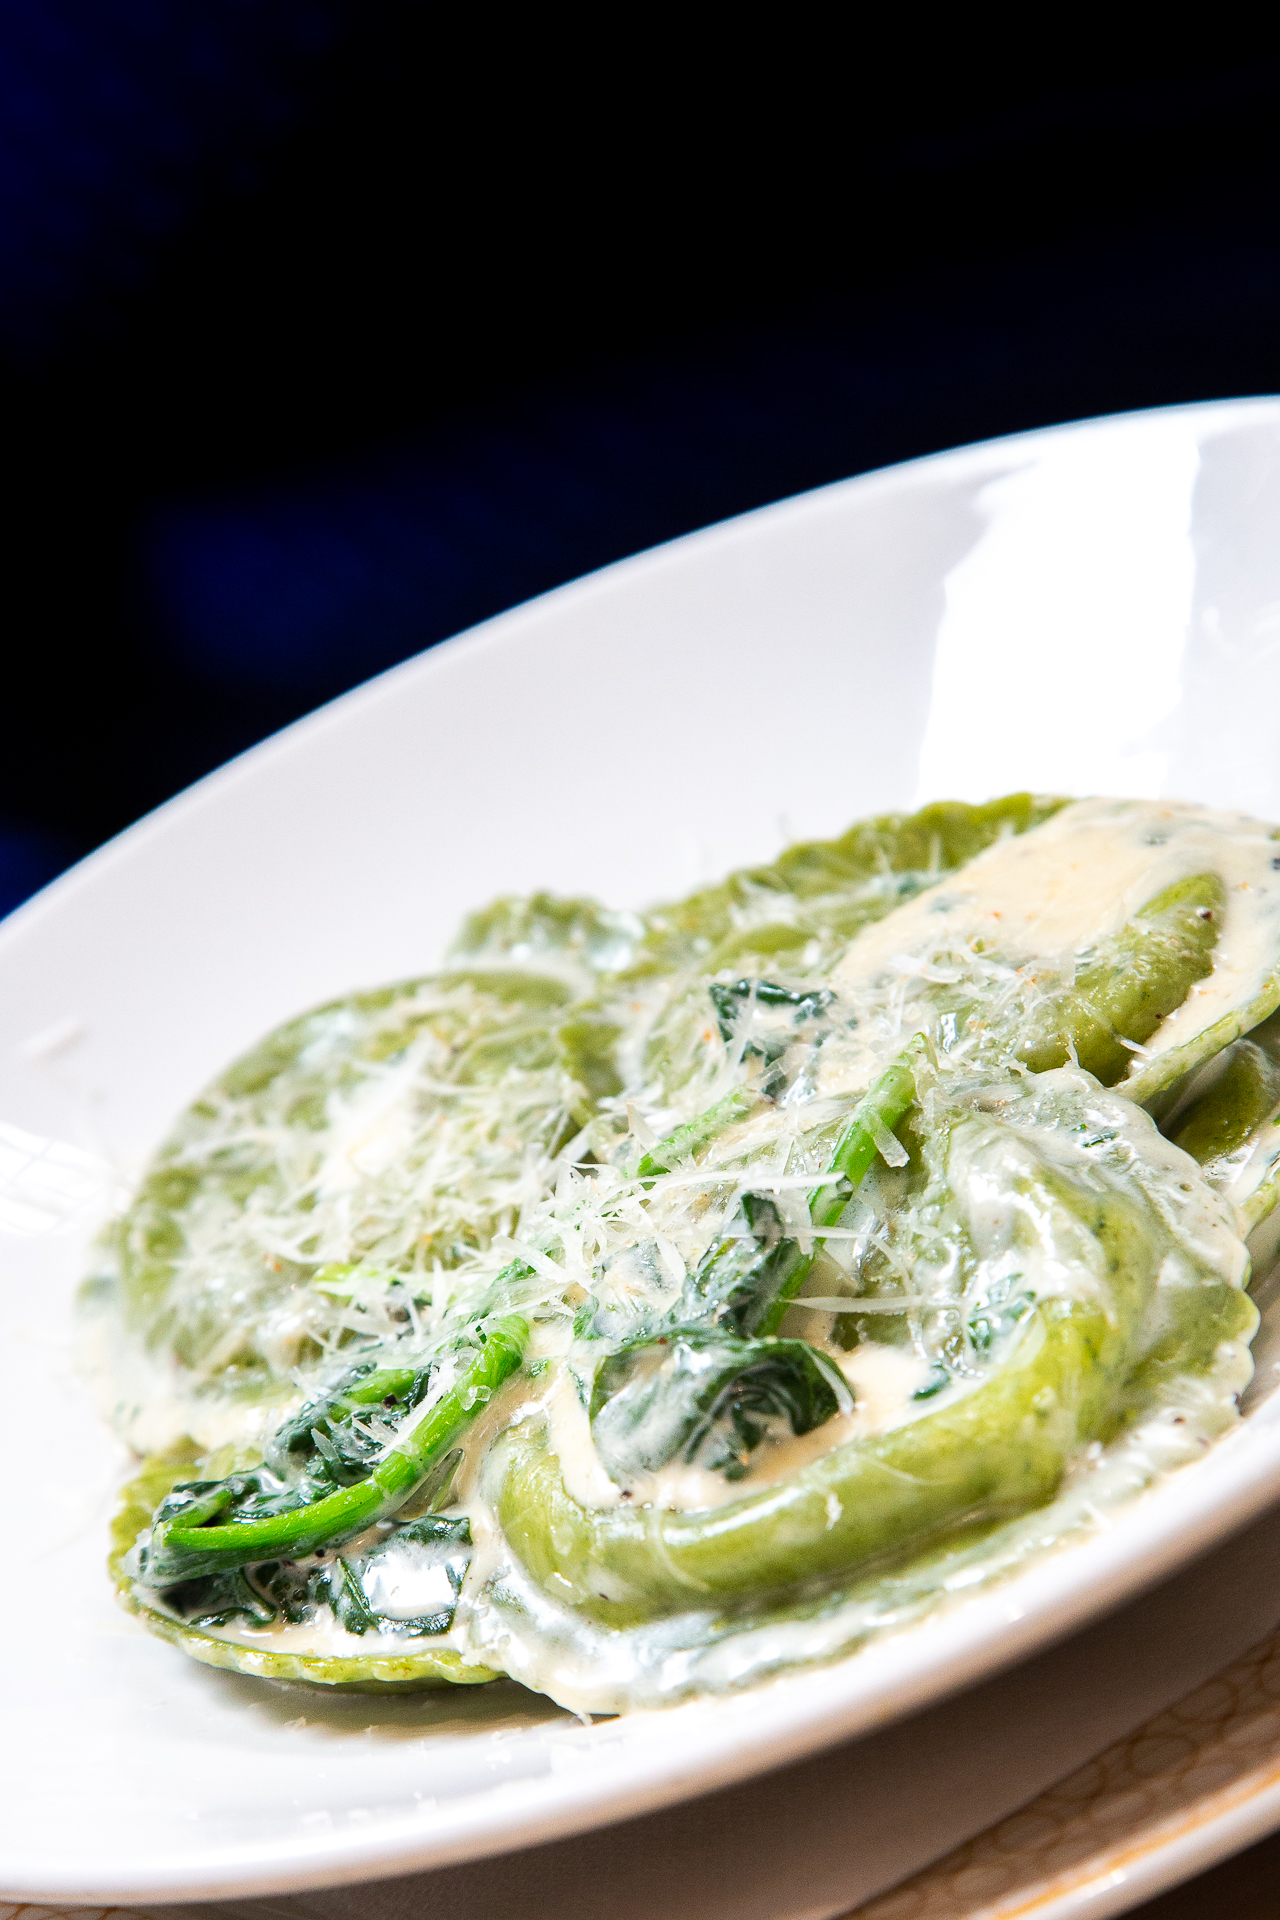 SPINACH & RICOTTA GIRASOLE 11.95 Meaning 'sunflower', these pretty pasta parcels are served with spinach and a mascarpone cream sauce.